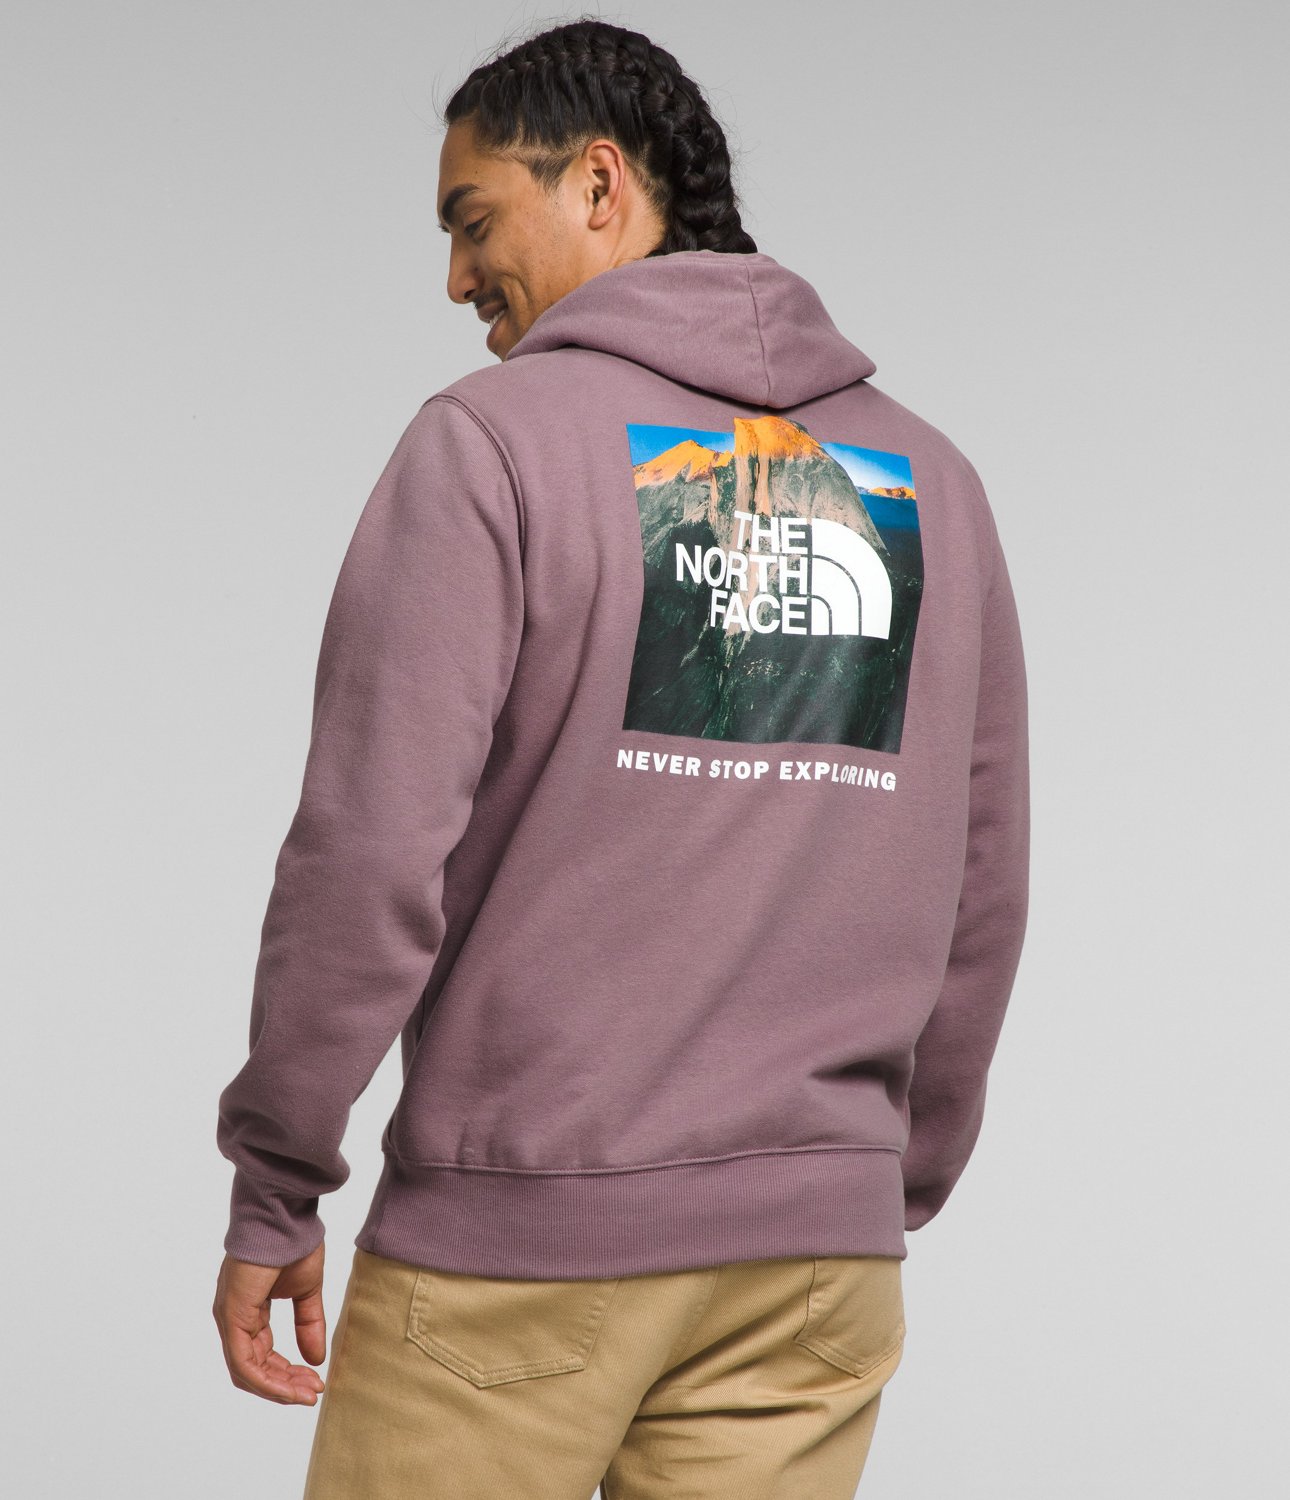 The North Face® Clothing & Gear For Sale